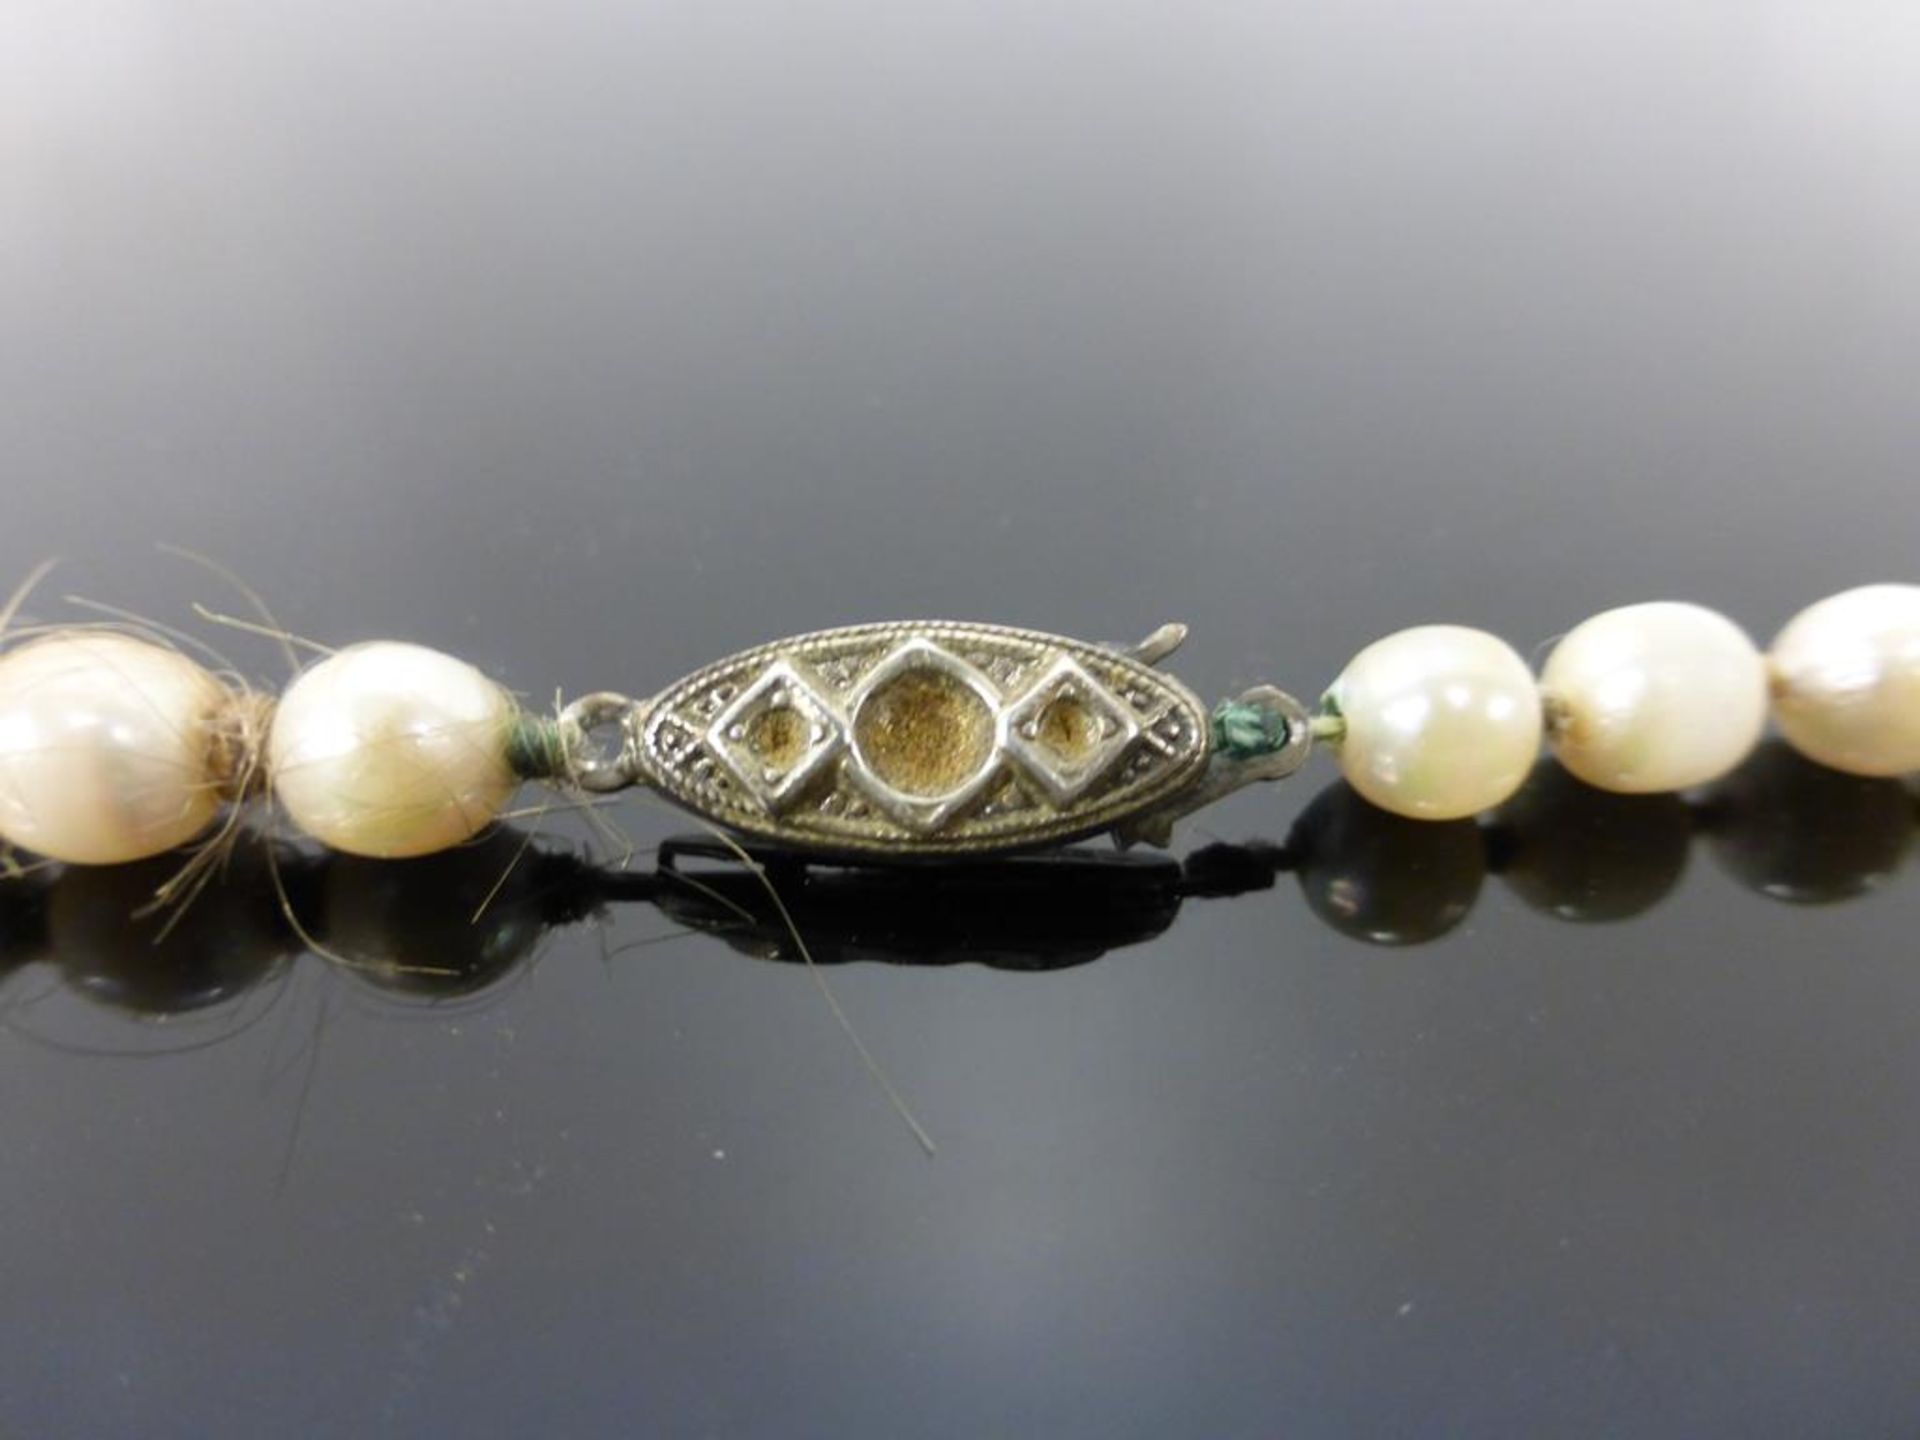 A Cultured Pearl Necklace with a Silver Clasp - Image 3 of 3